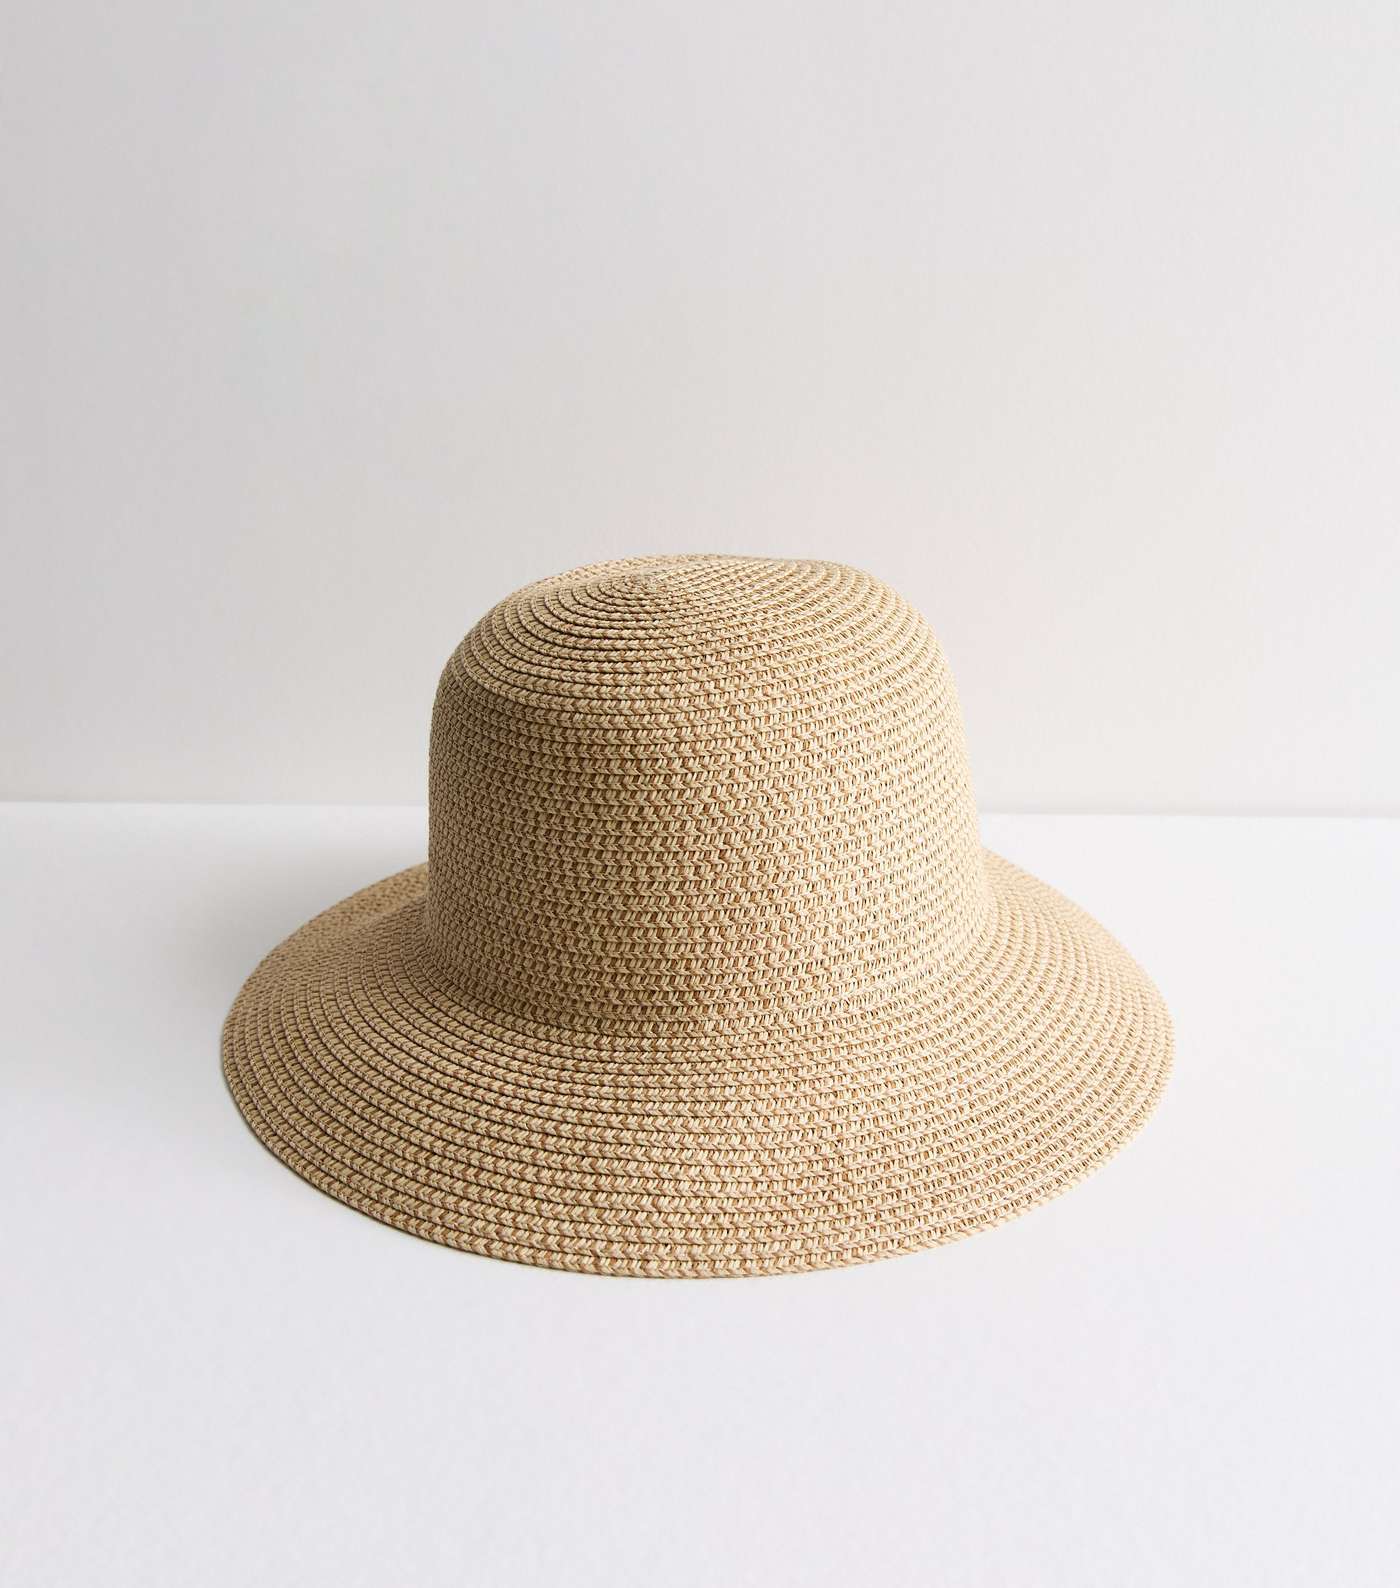 Stone Straw Effect Packable Bucket Hat Image 2